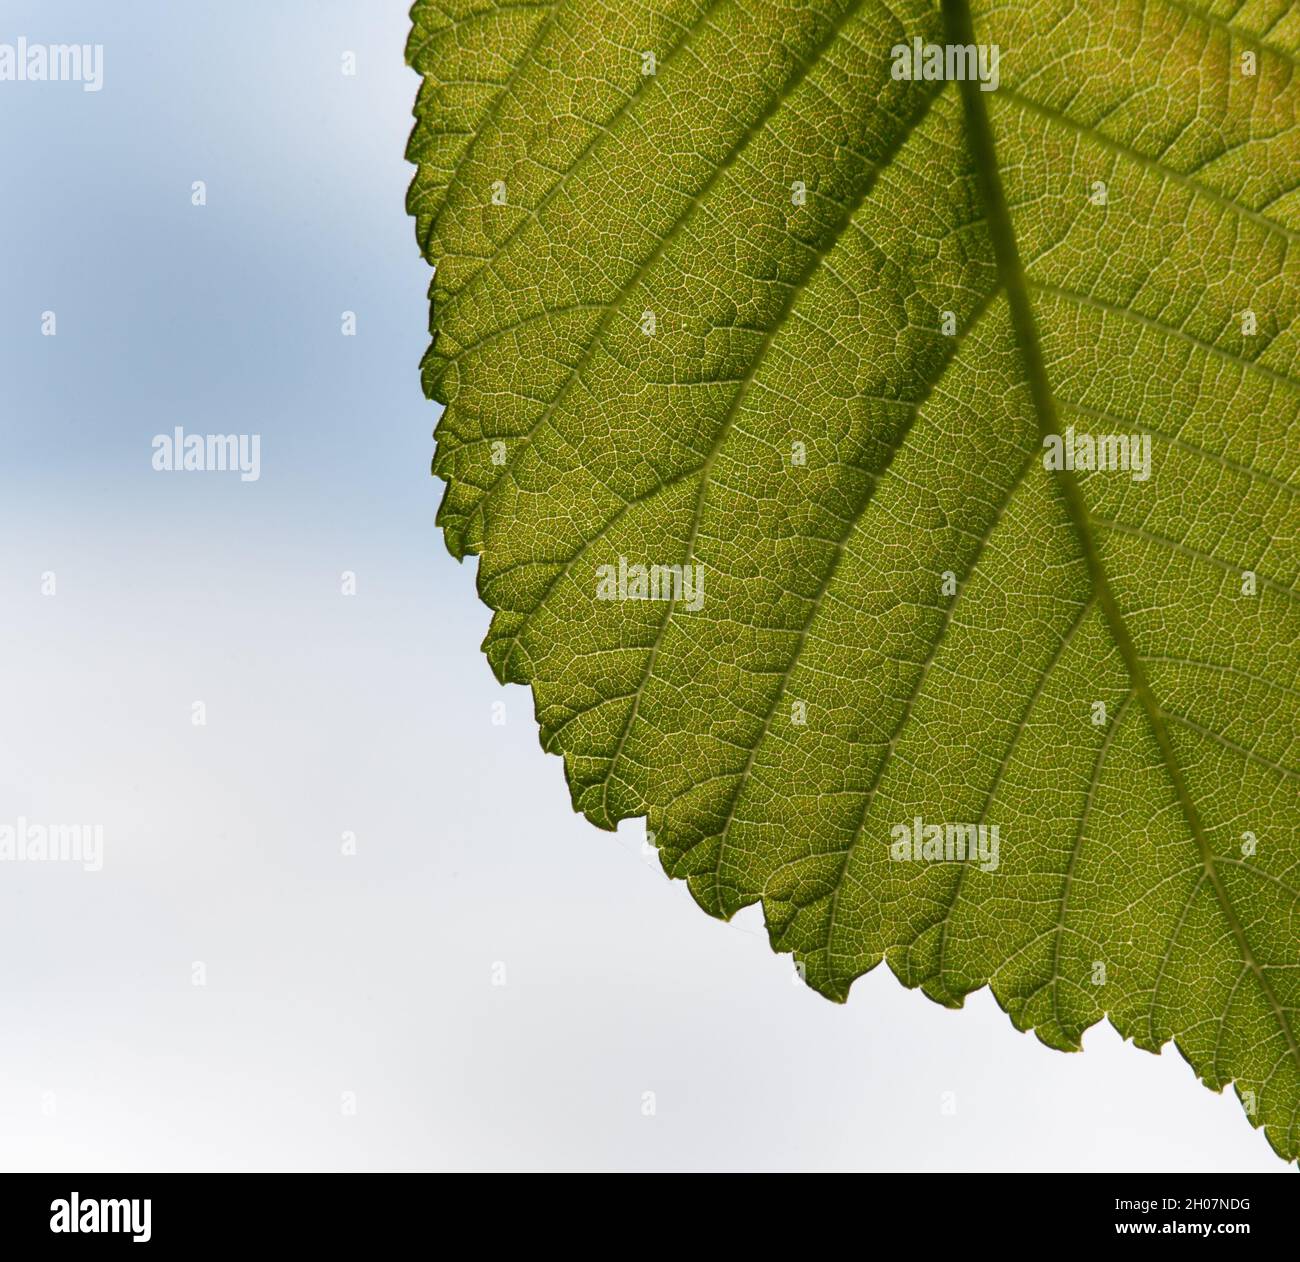 Close up of elm leaf (Ulmus) with fresh green color and texture Stock Photo